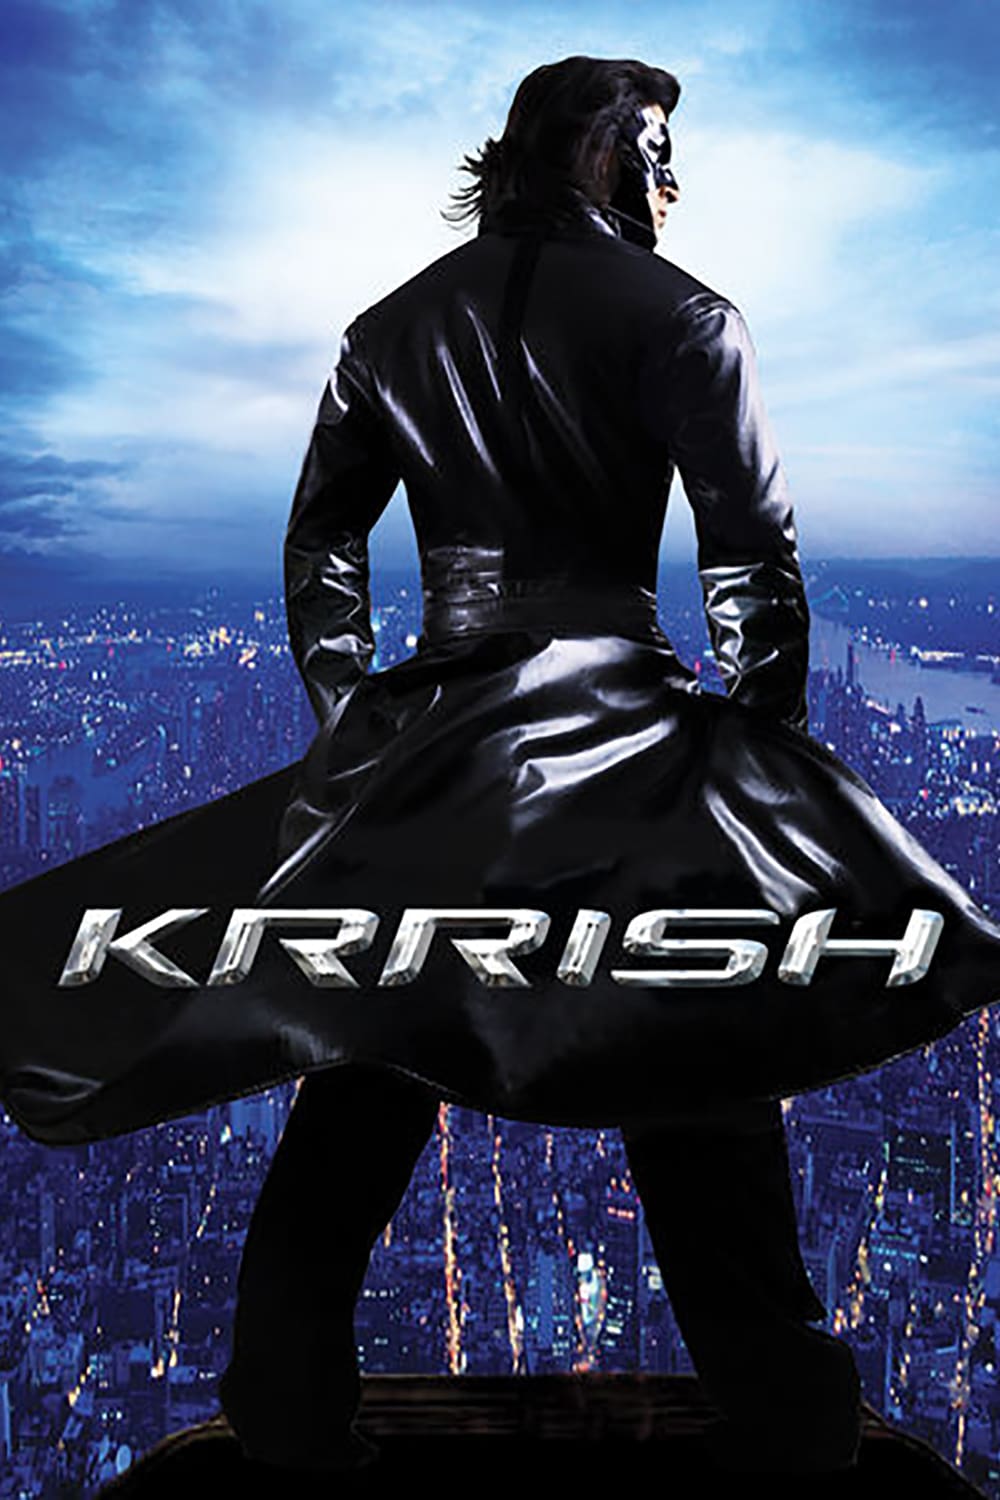 Poster for the movie "Krrish"